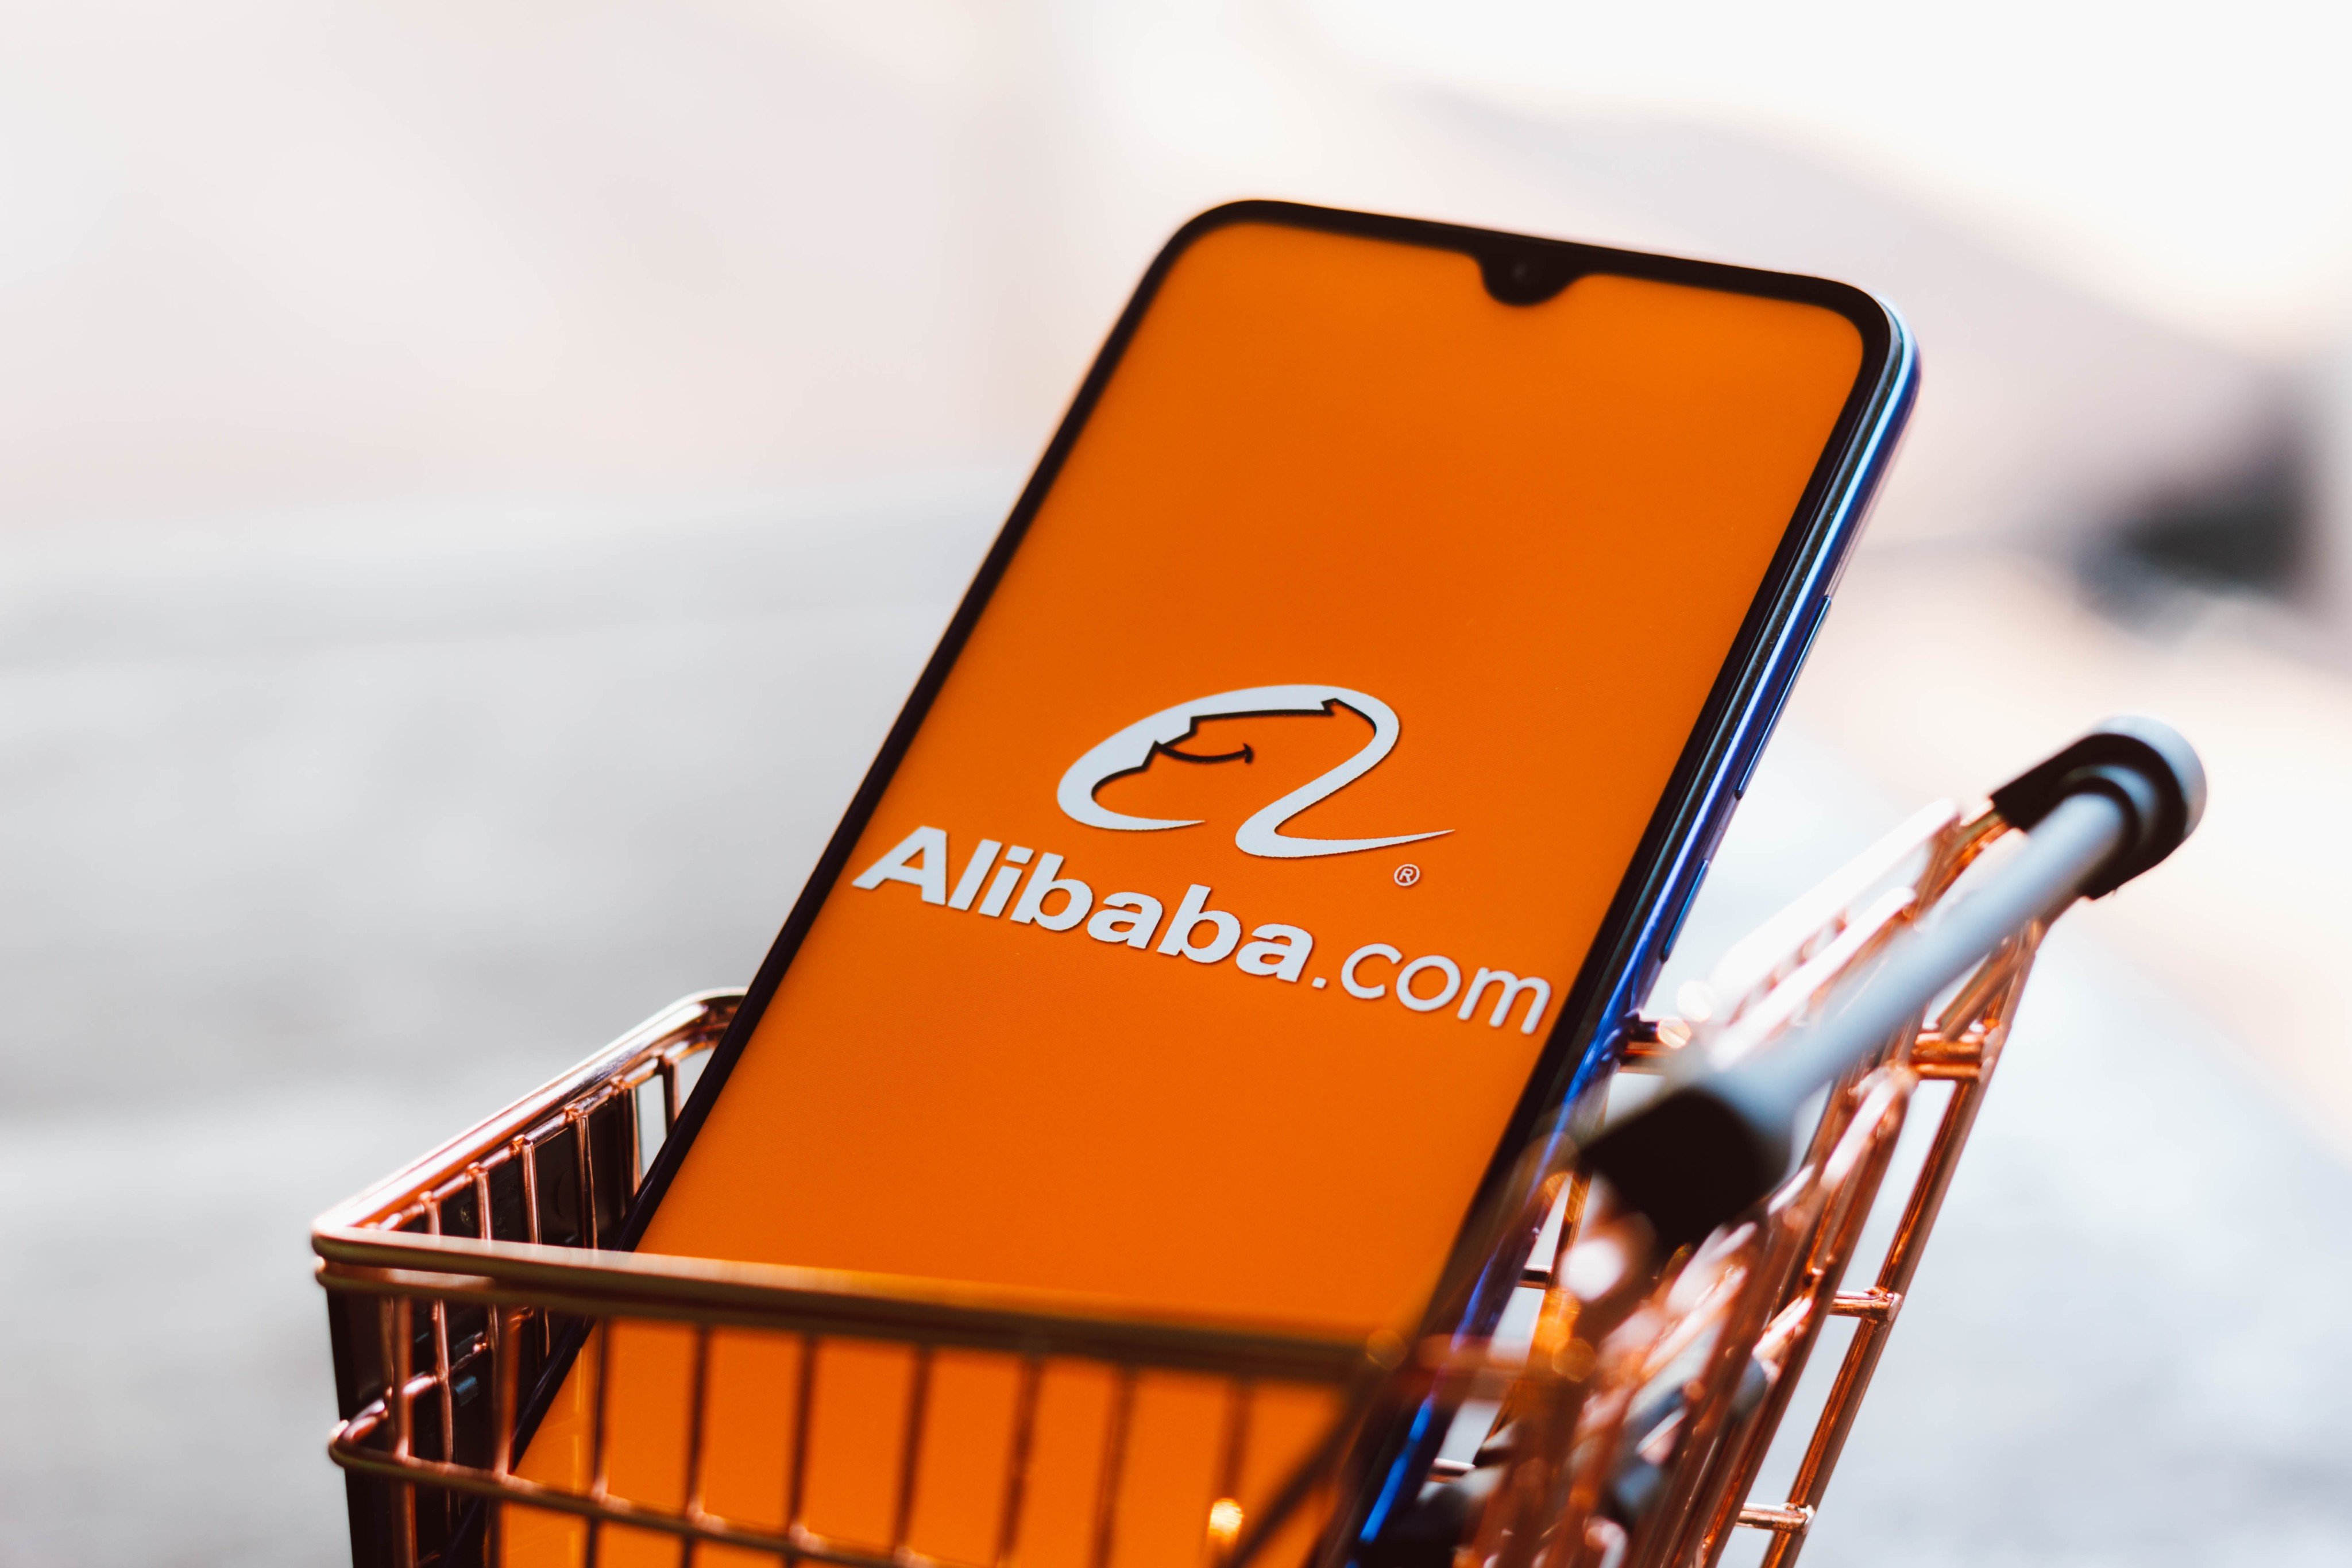 Alibaba.com, the international business-to-business wholesale platform of Alibaba Group Holding, has more than 200,000 merchants offering made-in-China products to markets around the world. Photo: Shutterstock